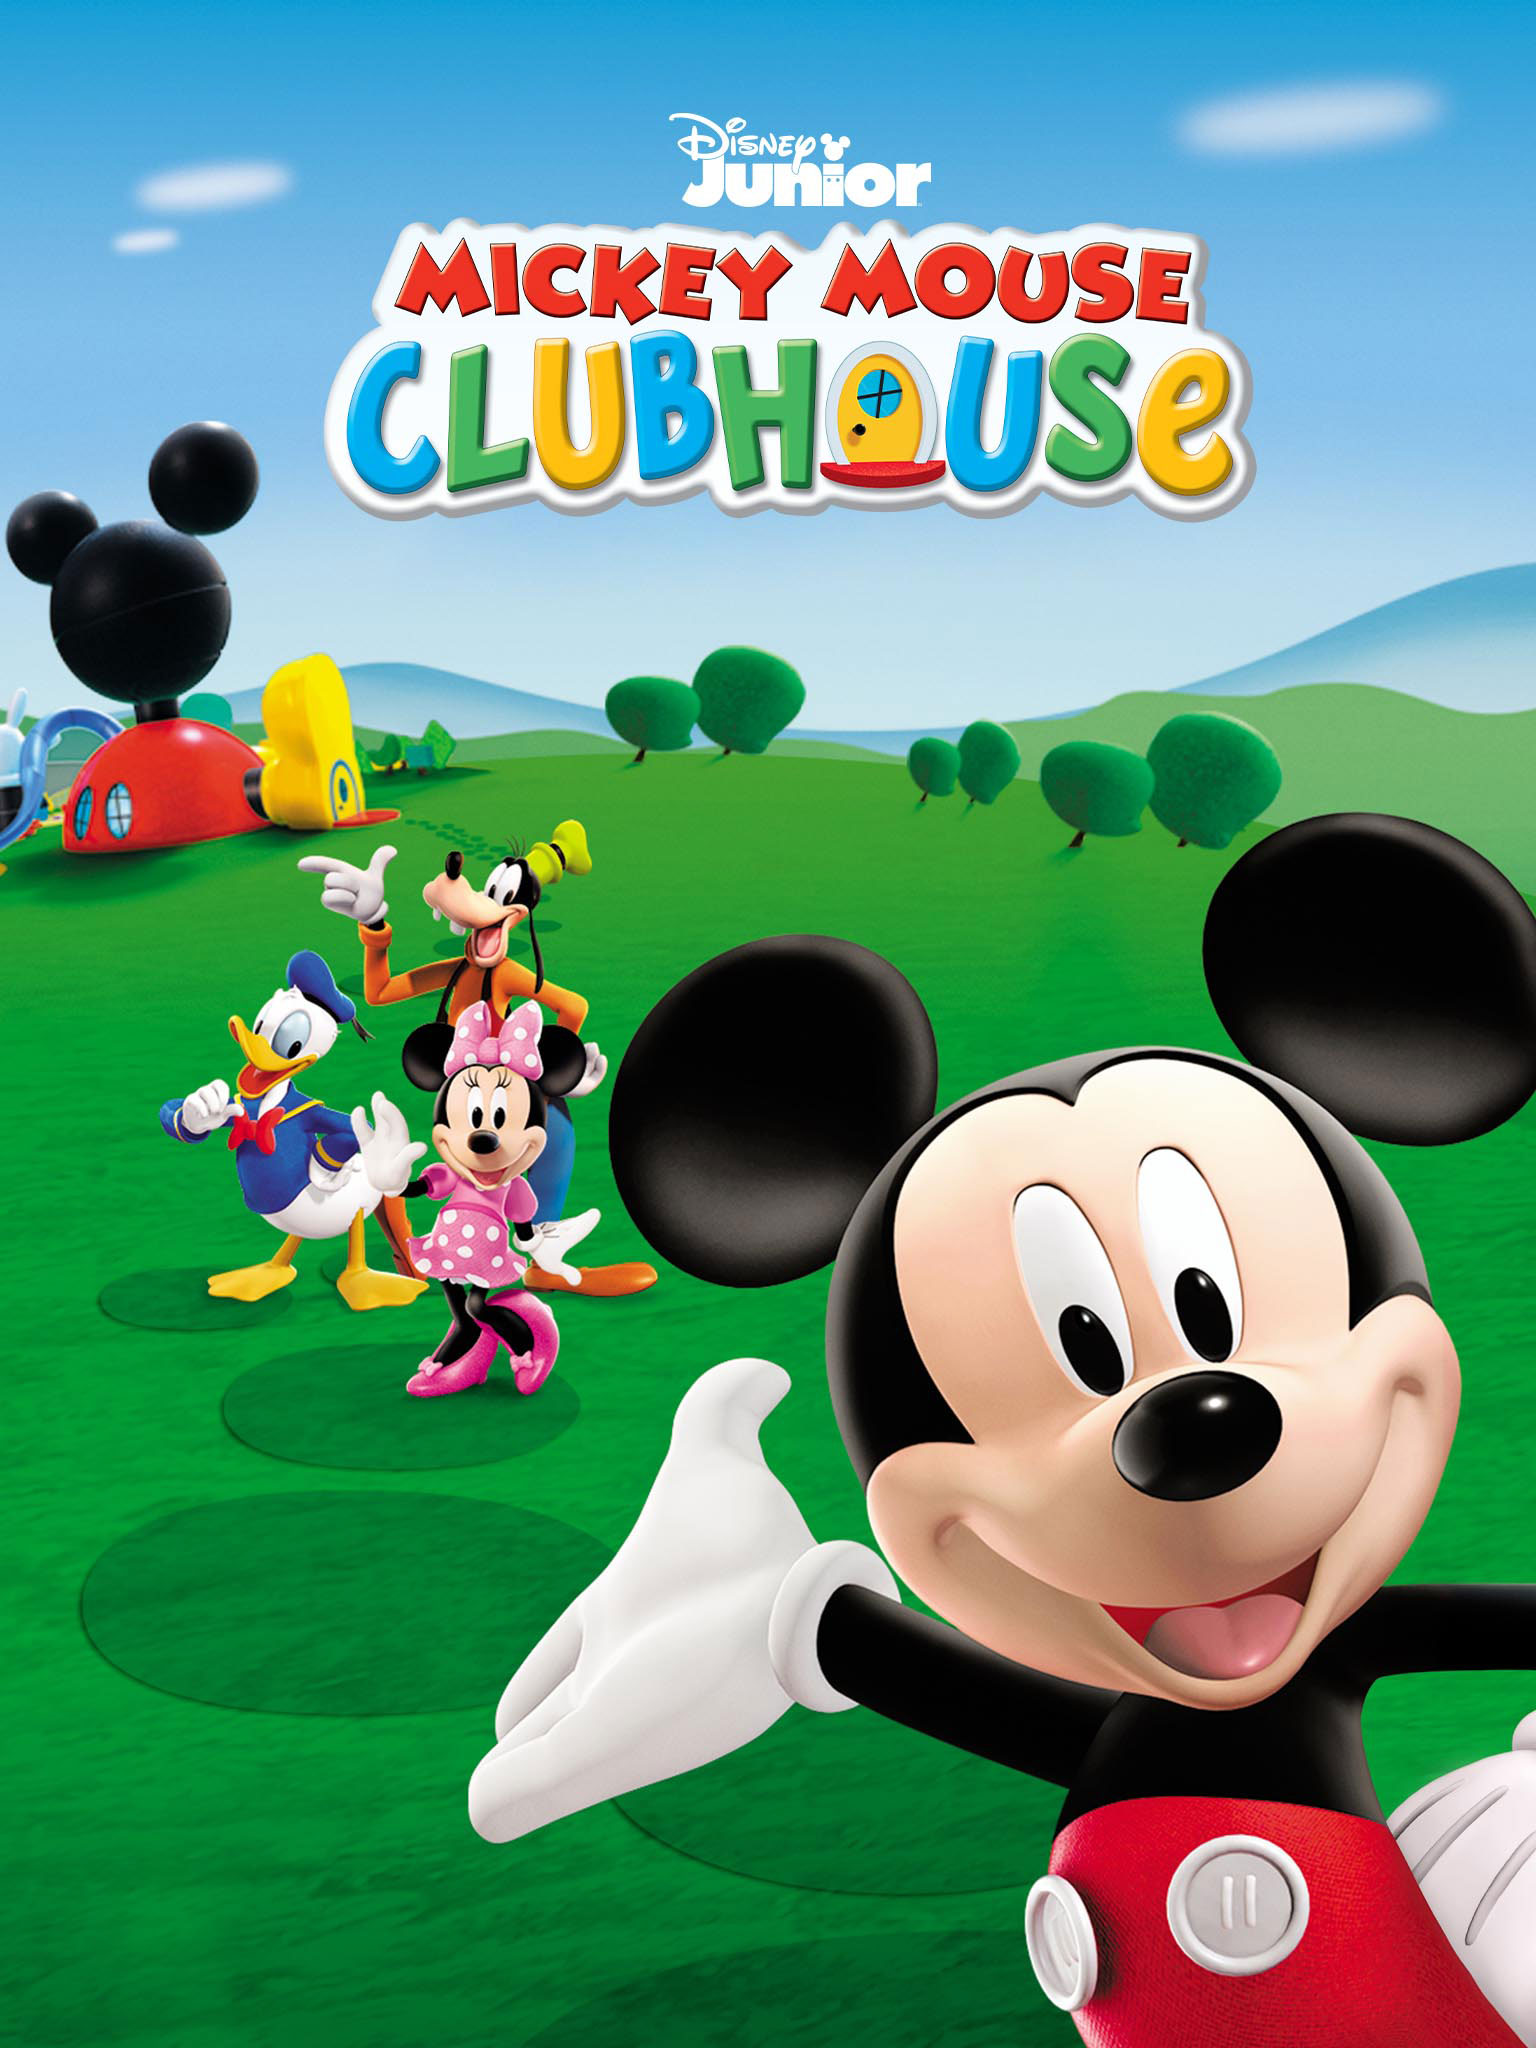 Mickey's Color Adventure, S1 E22, Full Episode, Mickey Mouse Clubhouse